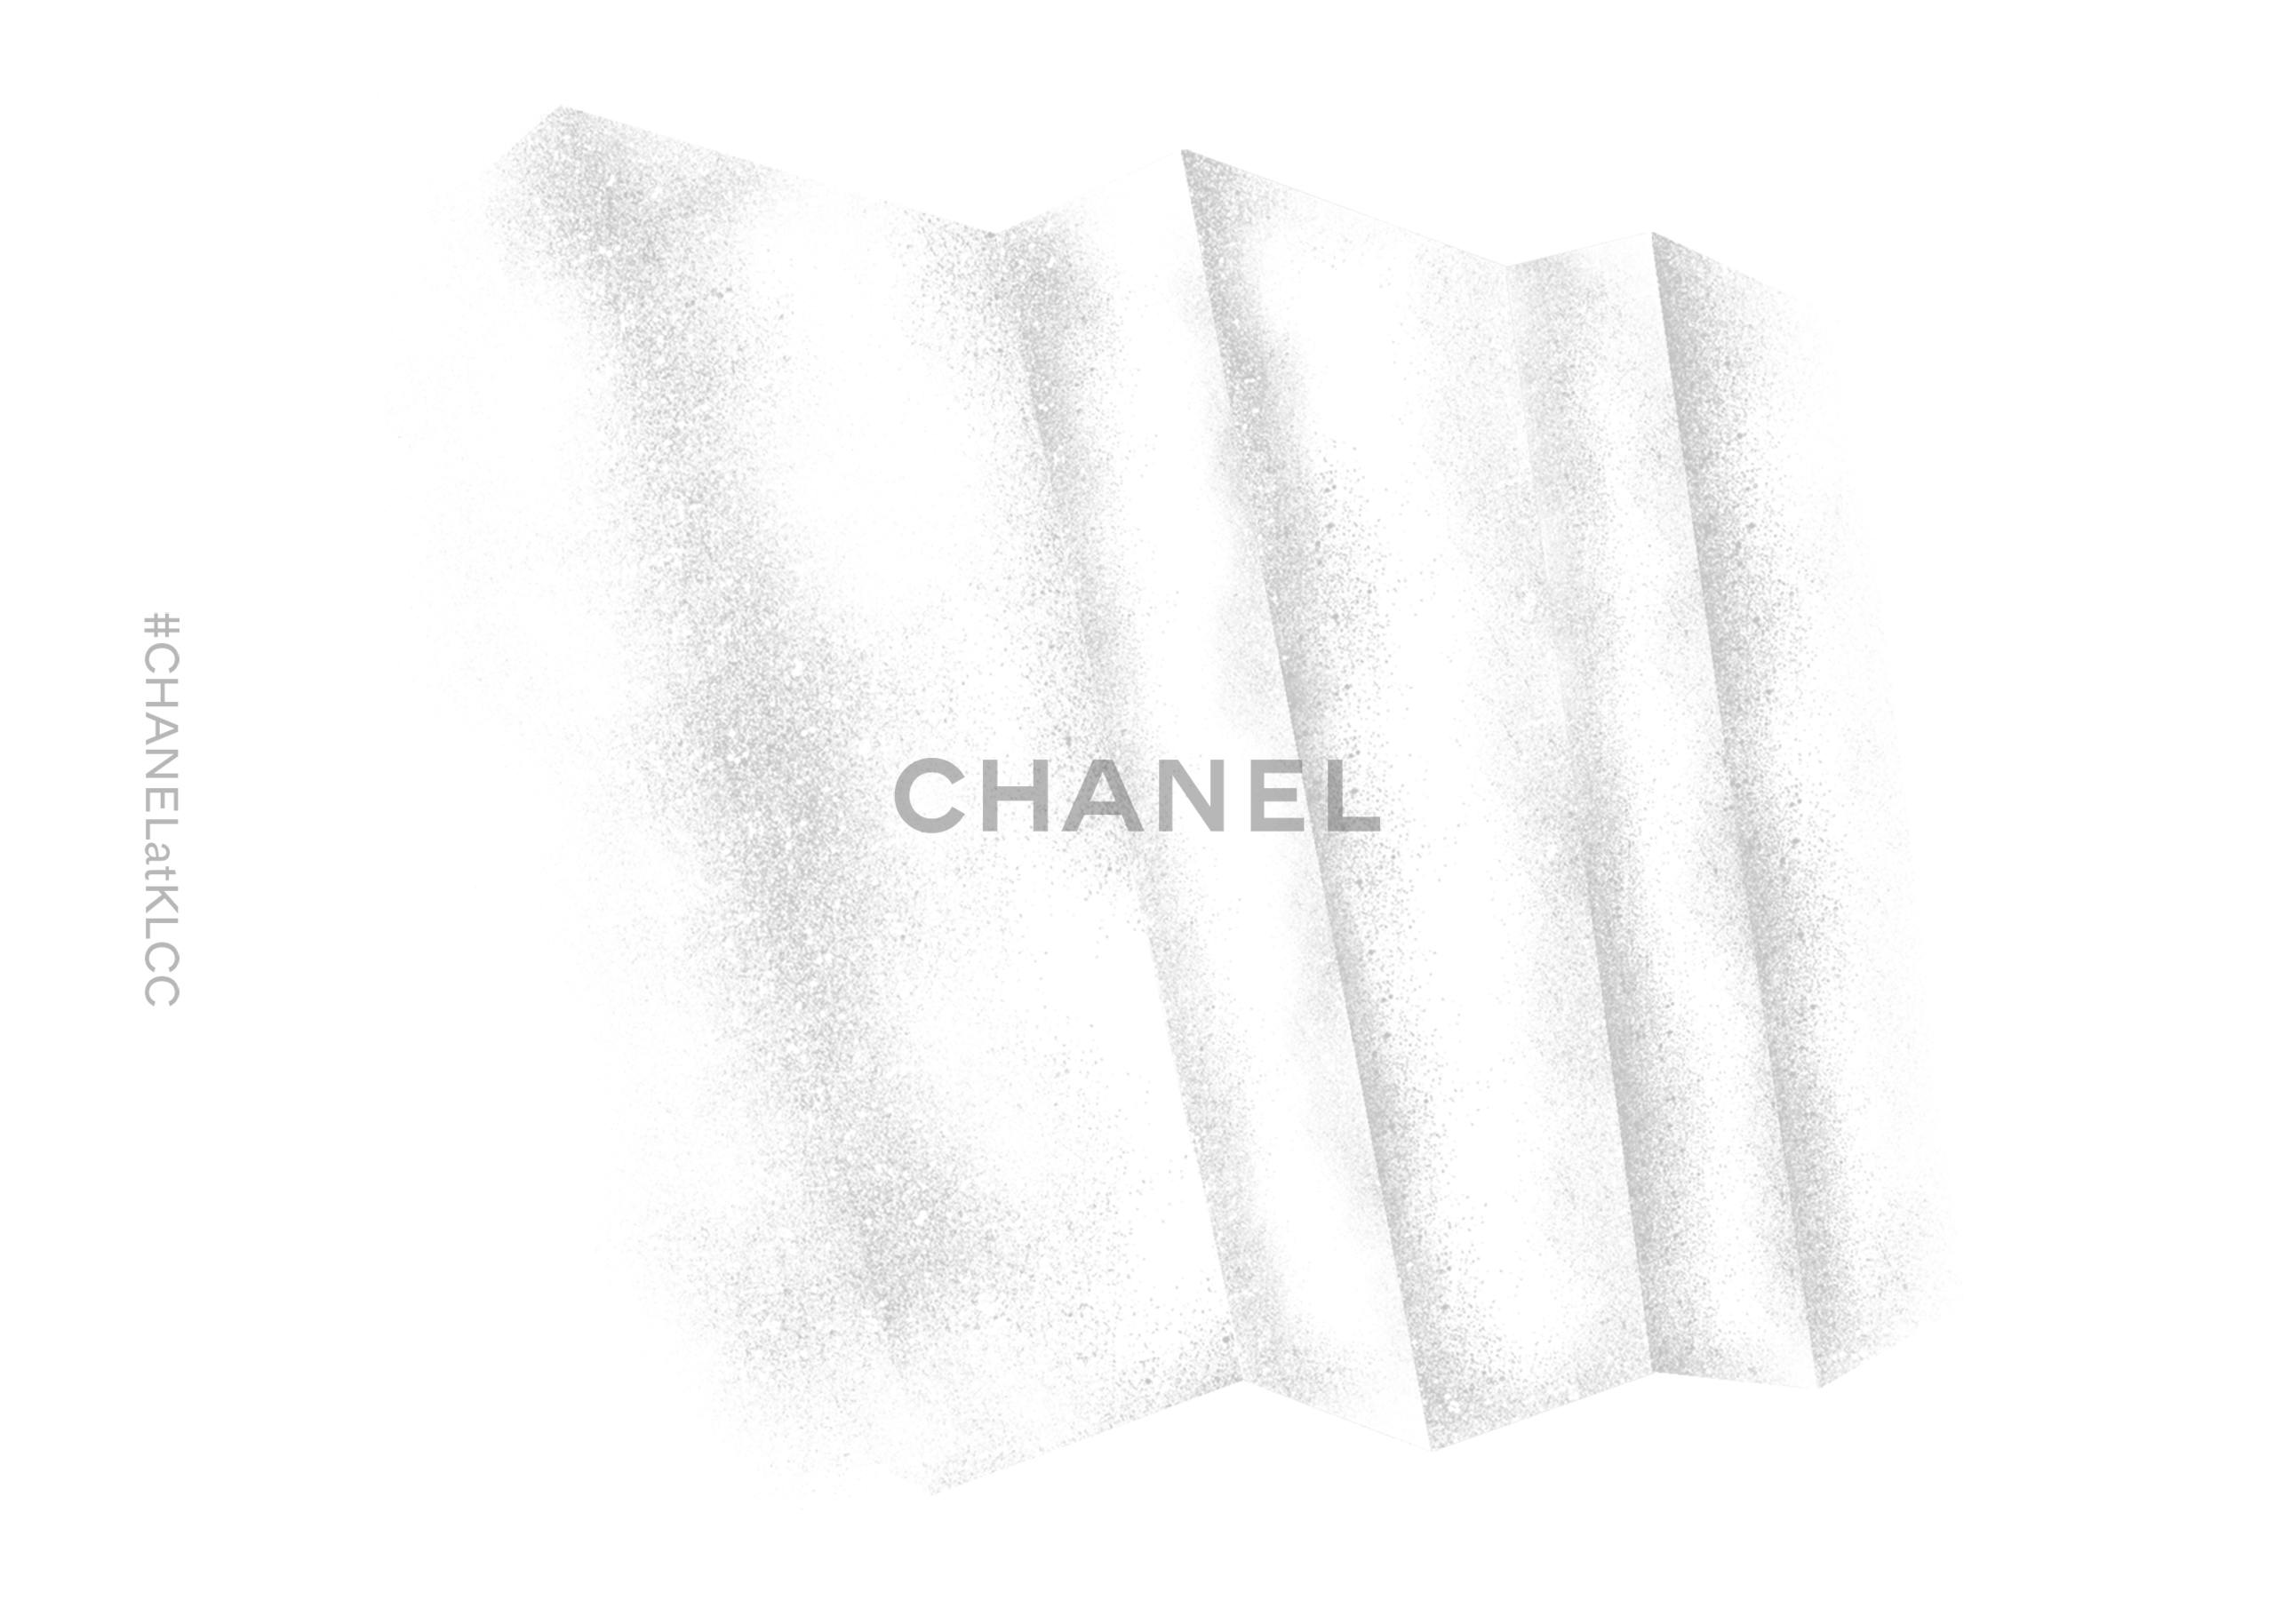 Chanel opens an 